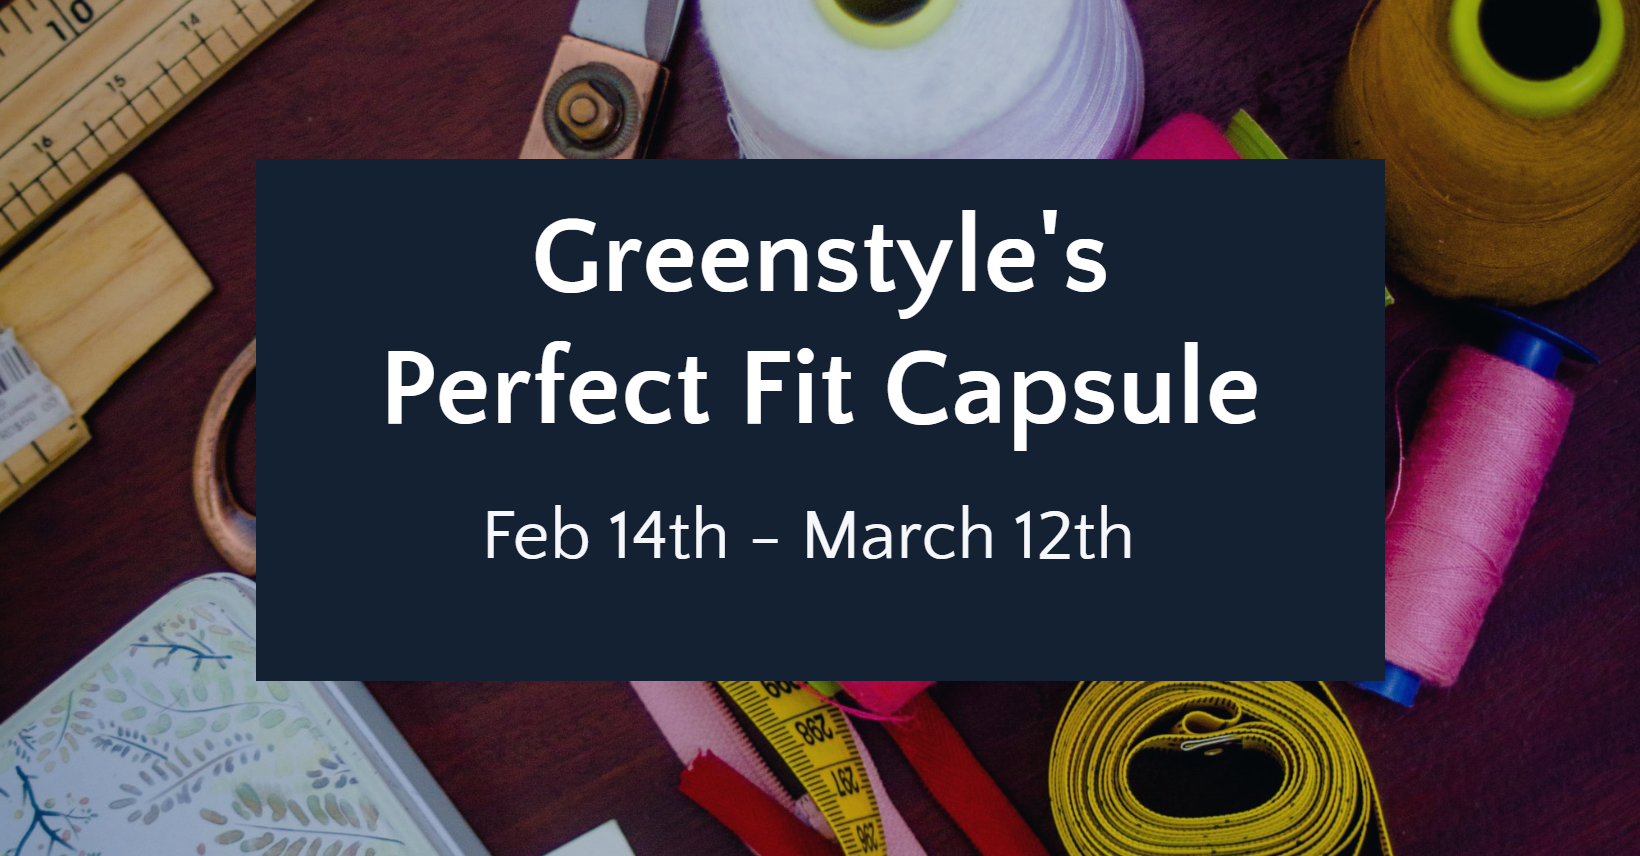 The Perfect Fit Capsule Challenge 2022